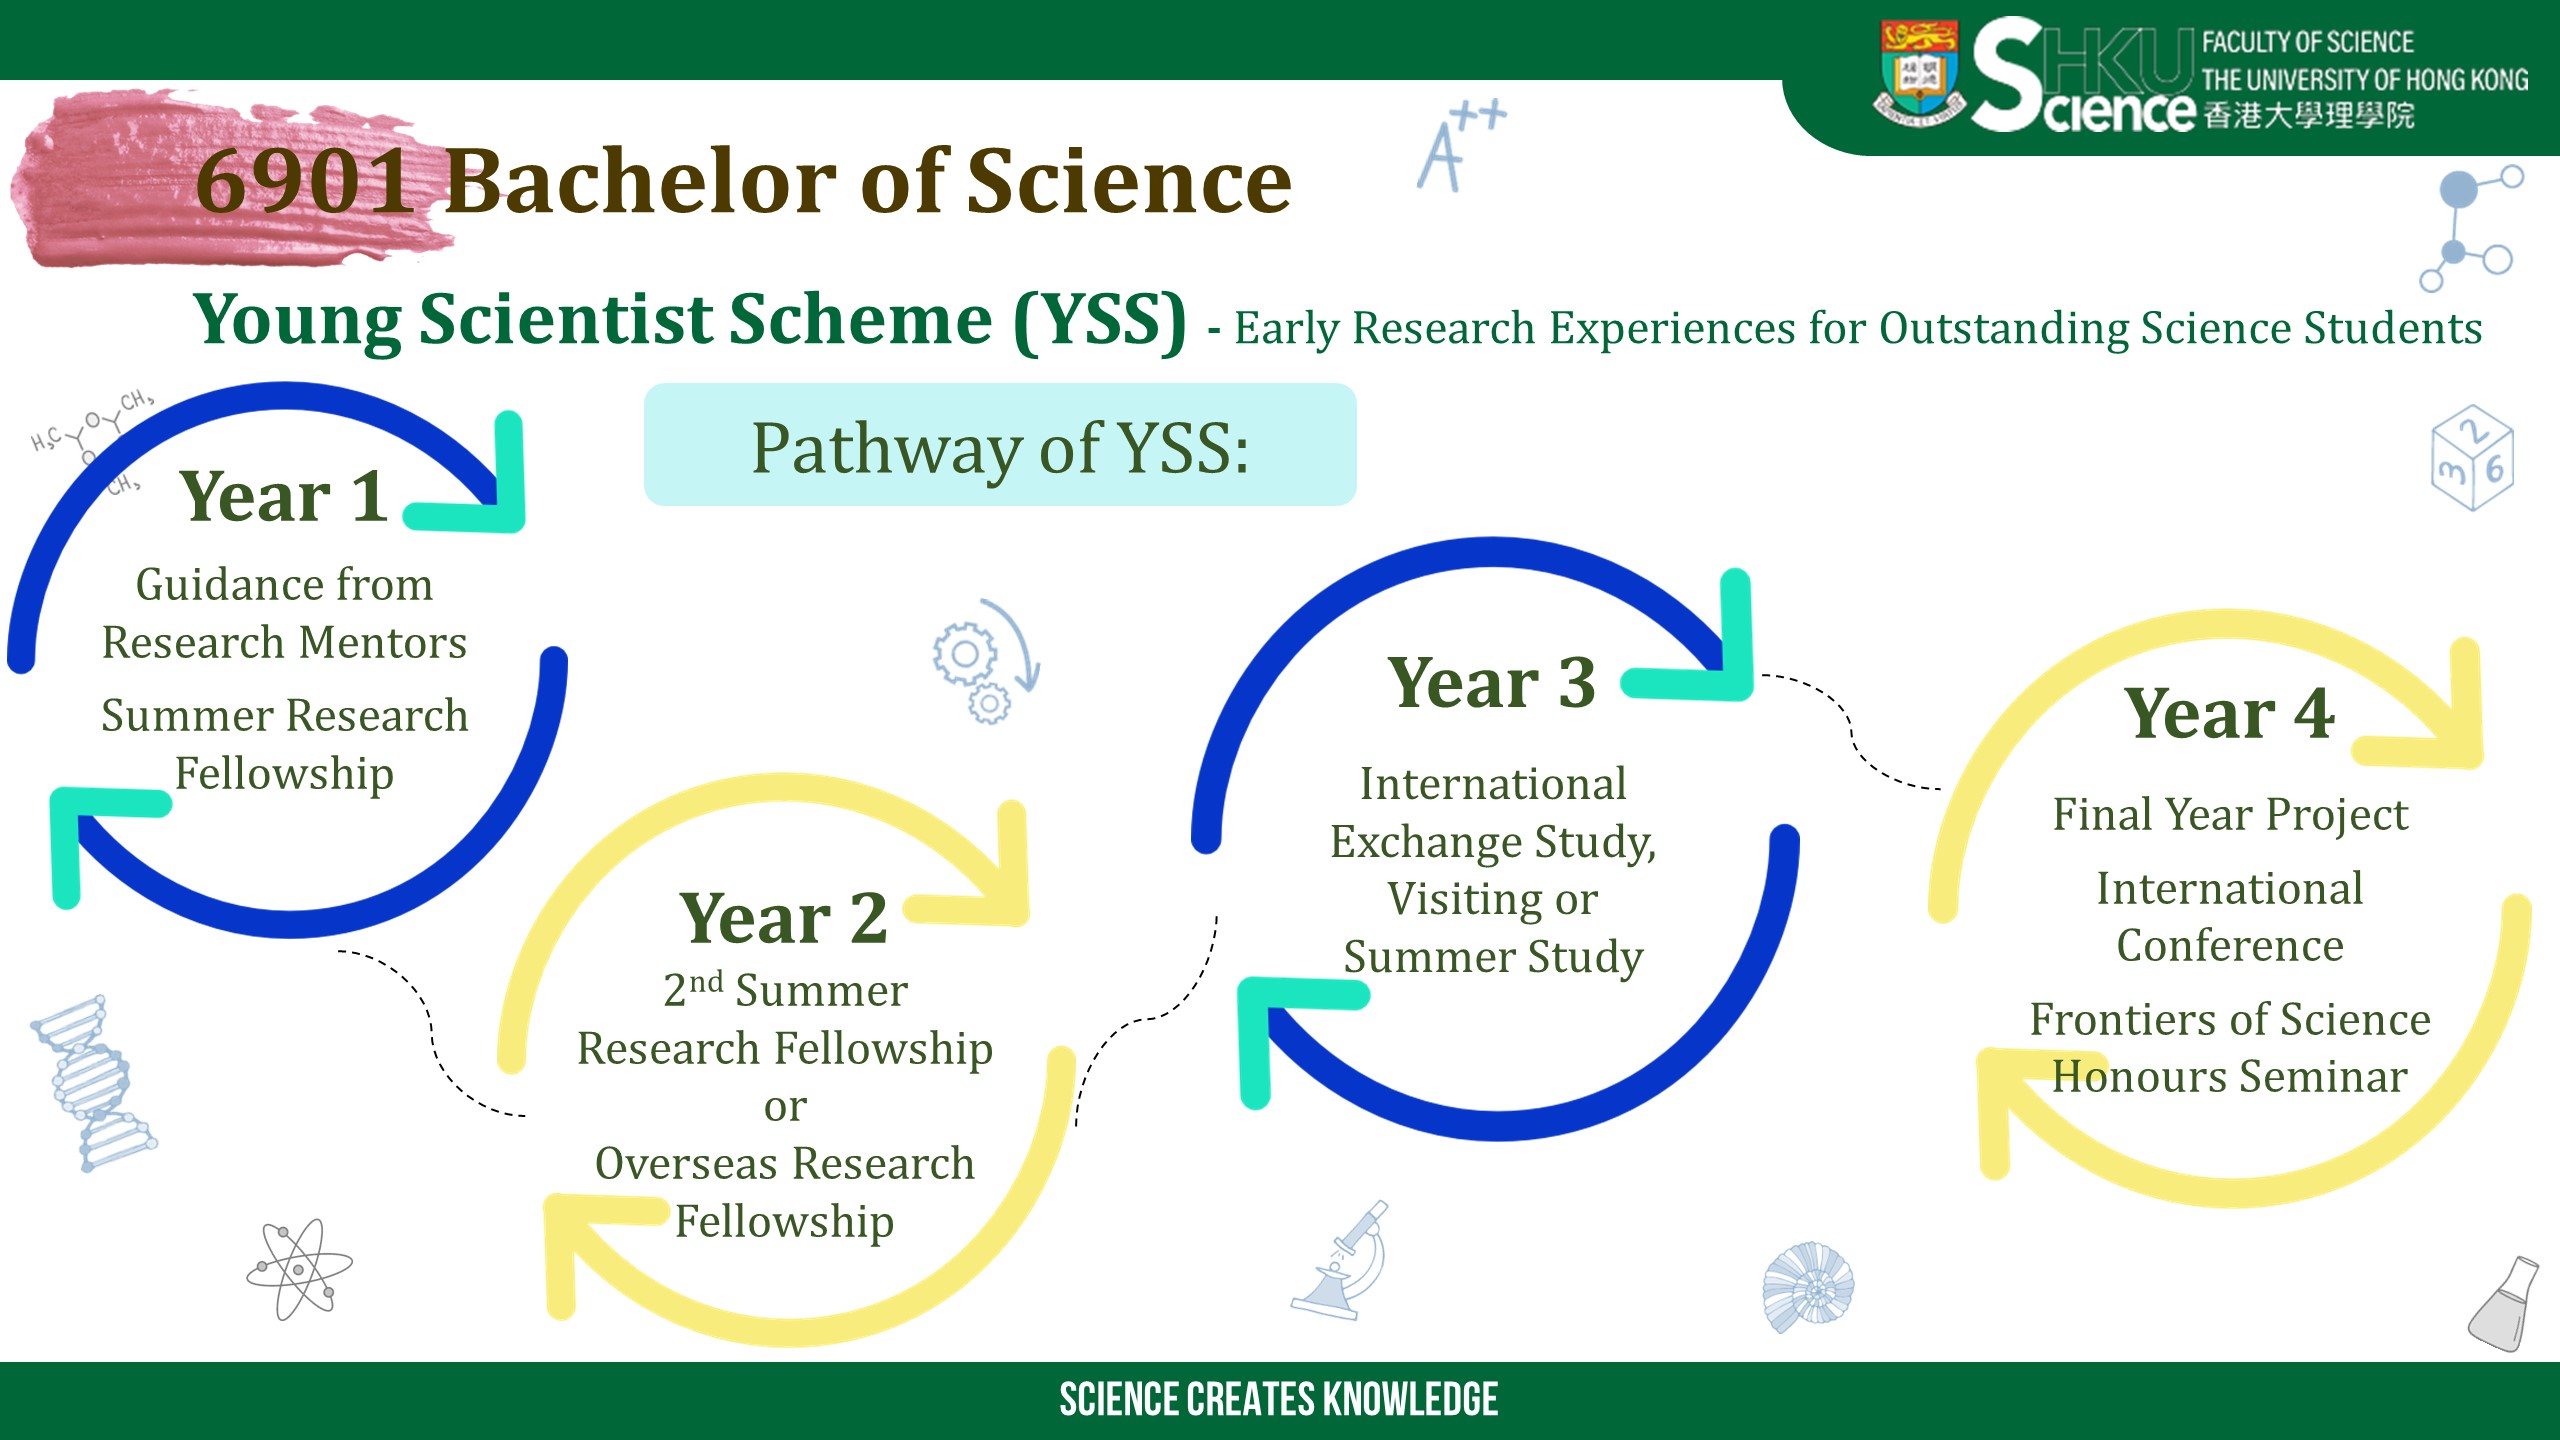 Pathway of YSS students:Year 1-SRF, Research Mentor; Year 2-2nd SRF/ORF, Year3-exchange study, Year 4-Final Year Project/International Conference/Frontier of Science Honours Seminar